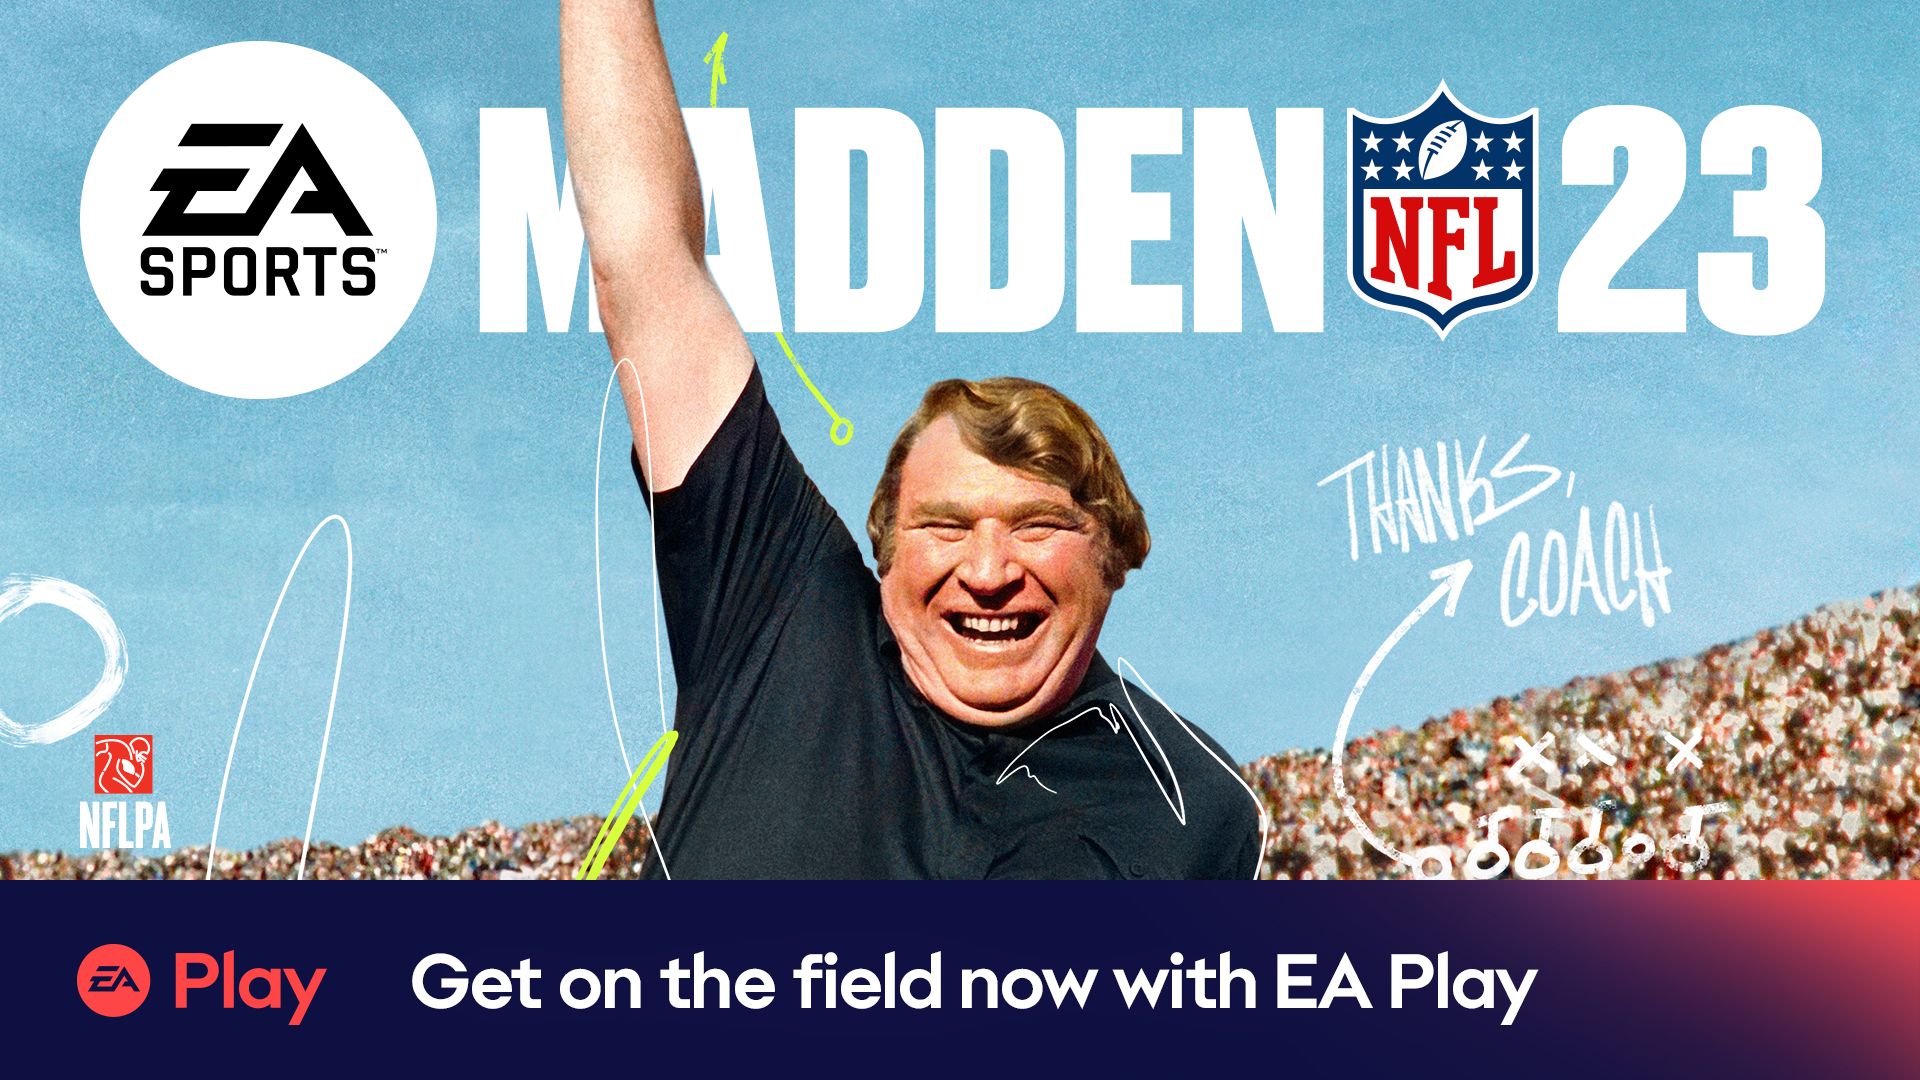 Madden NFL 23 Early Access Begins Now